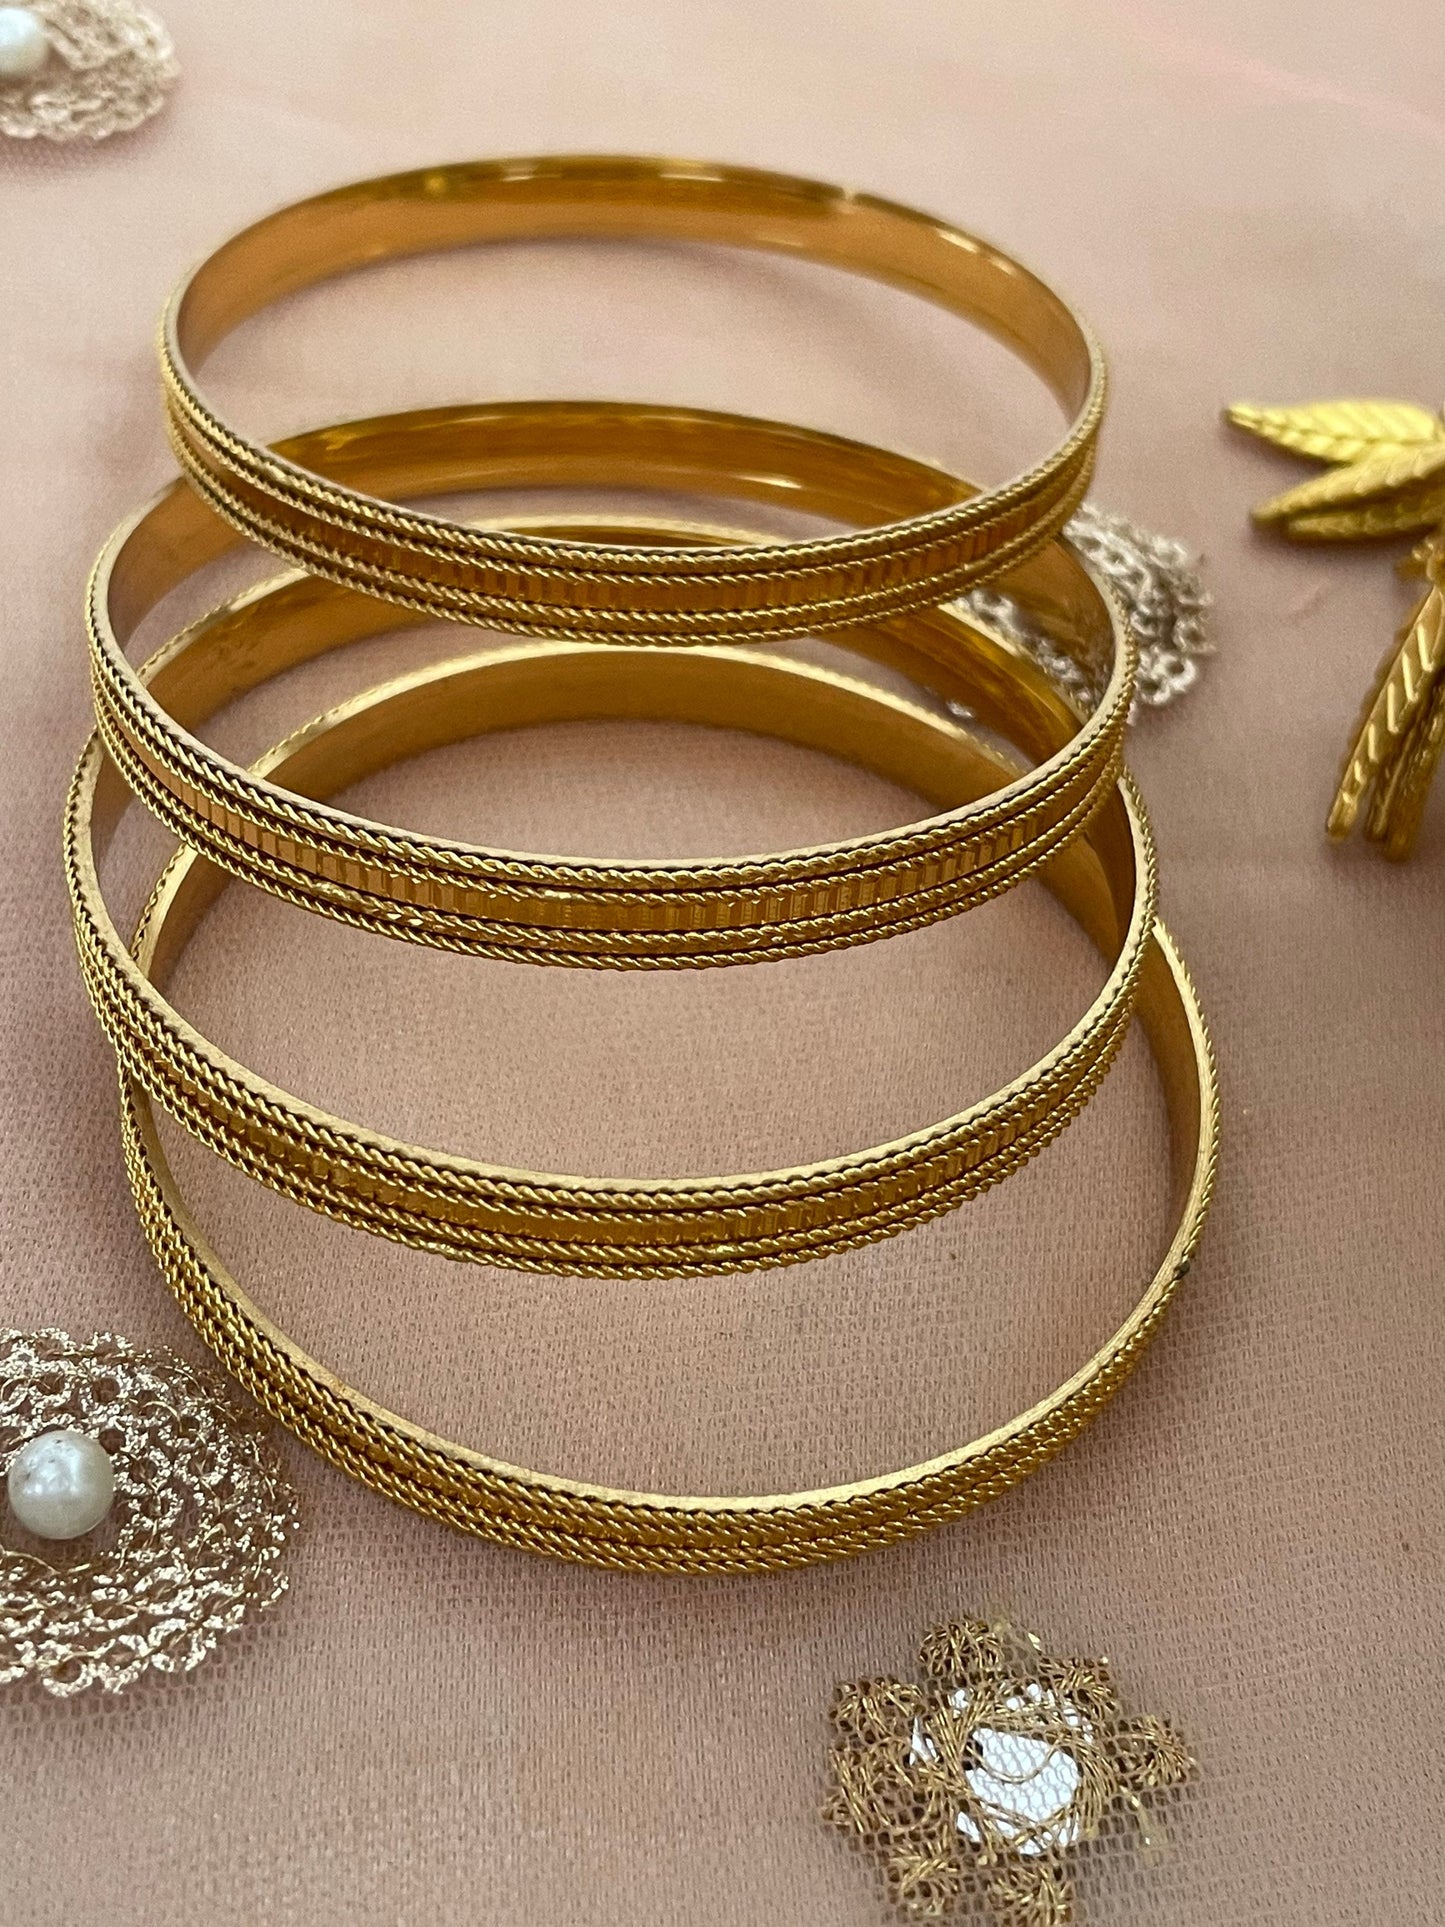 Set of four Solid Gold style Bangles With intricate border detailing Real jewellery style